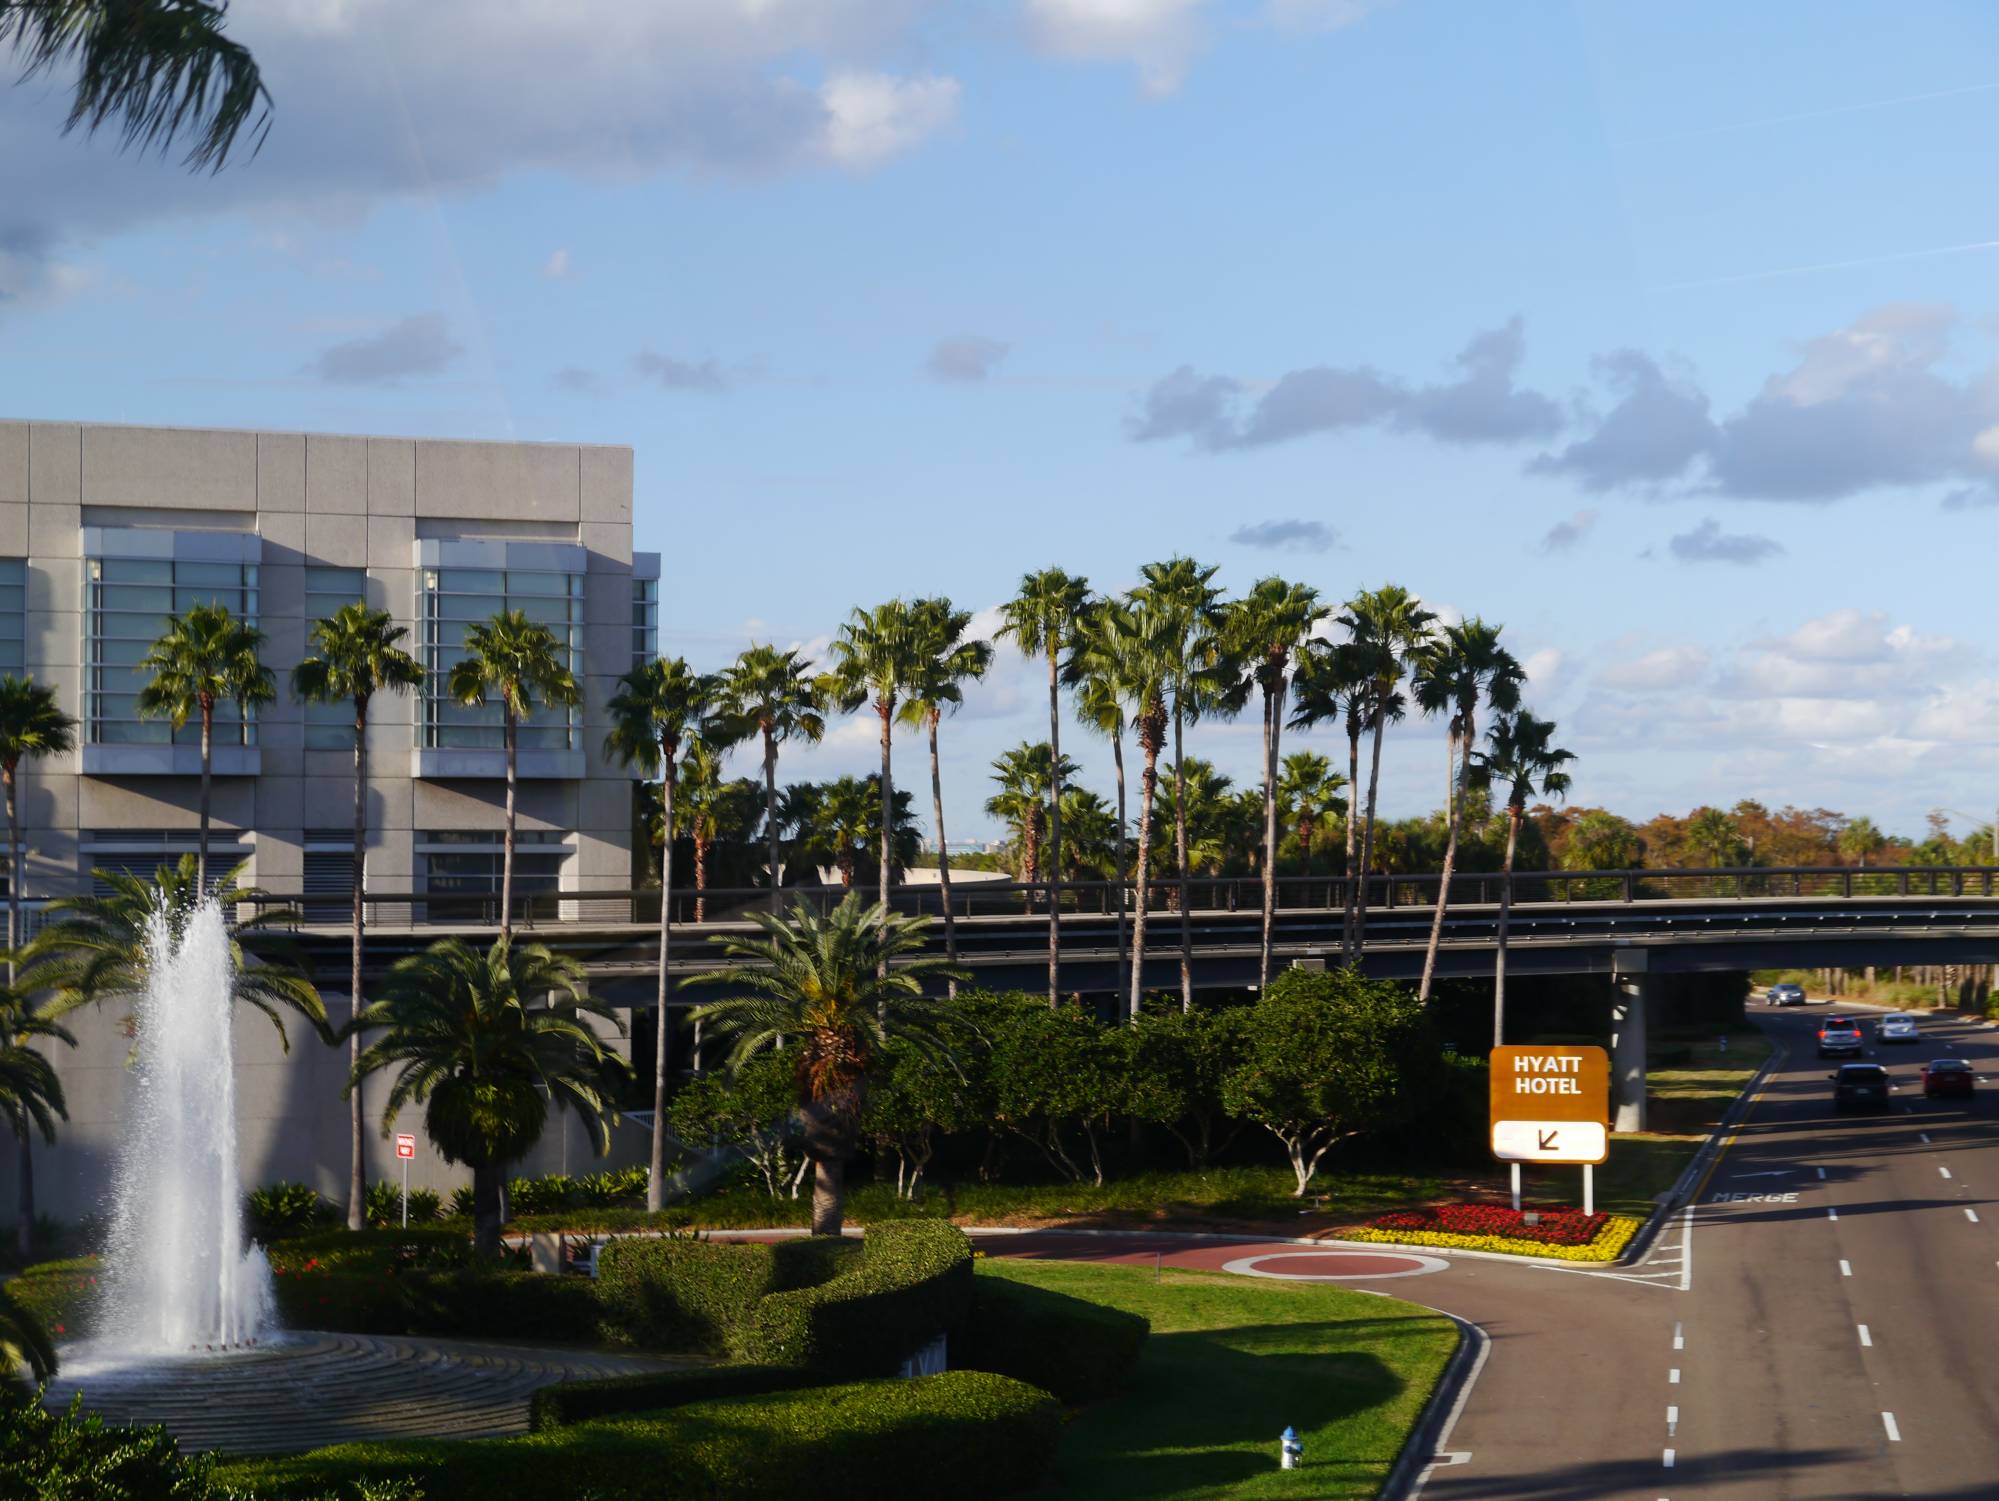 Orlando International - view from the monorail